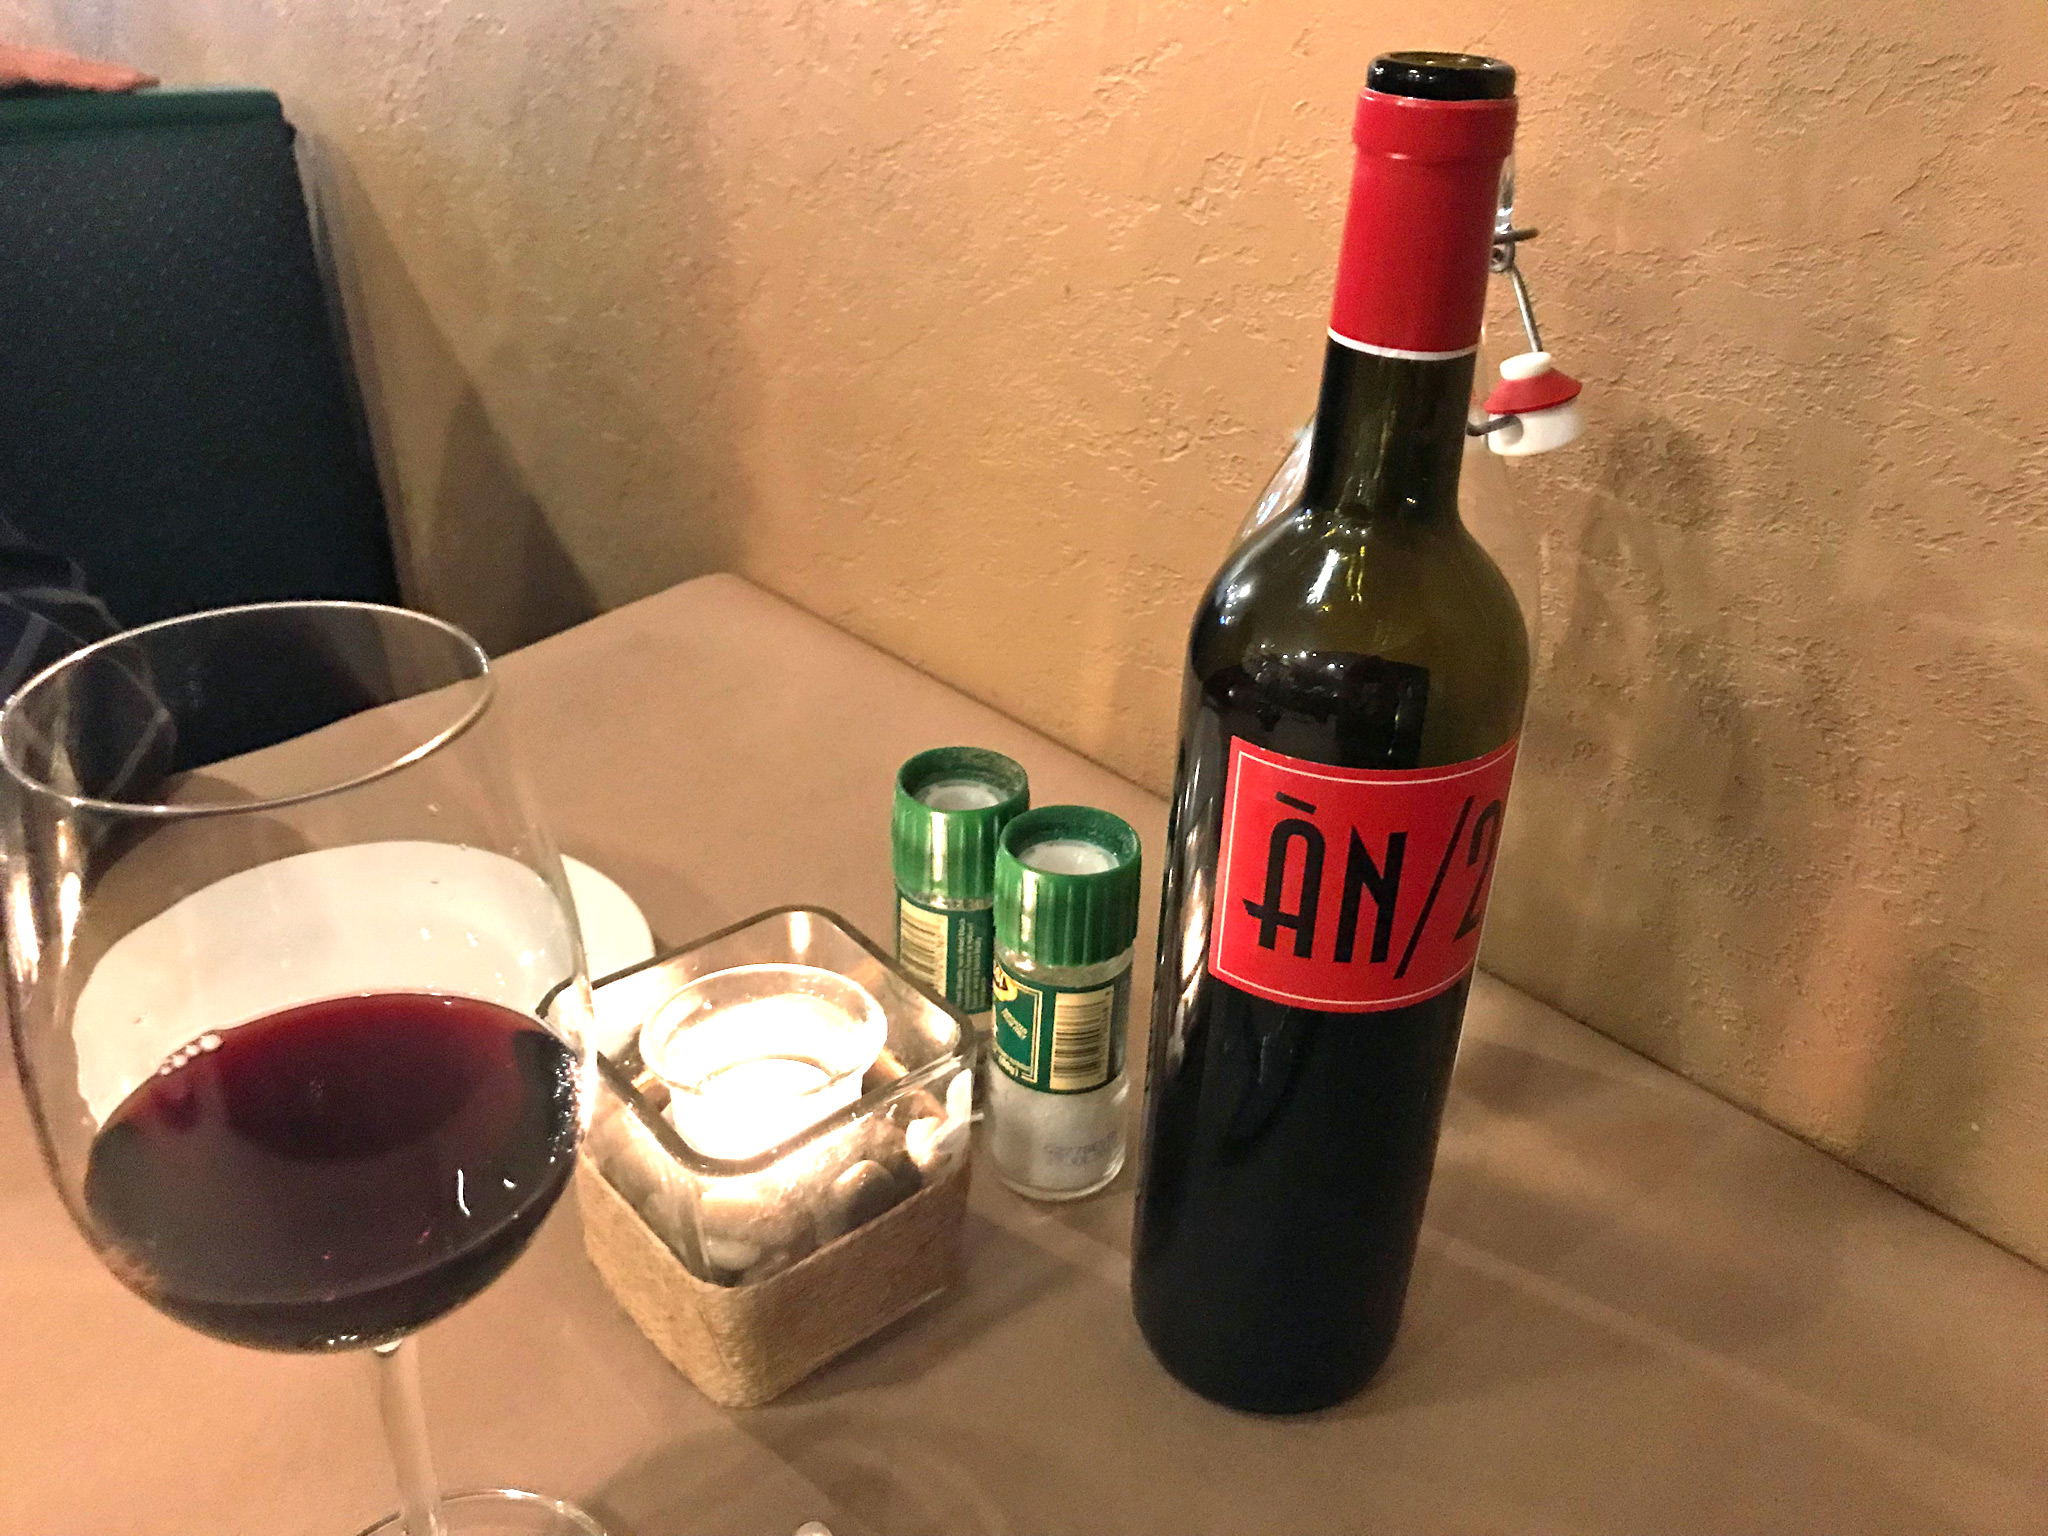 Anima Negra An/2 2015 Red Wine from Spain